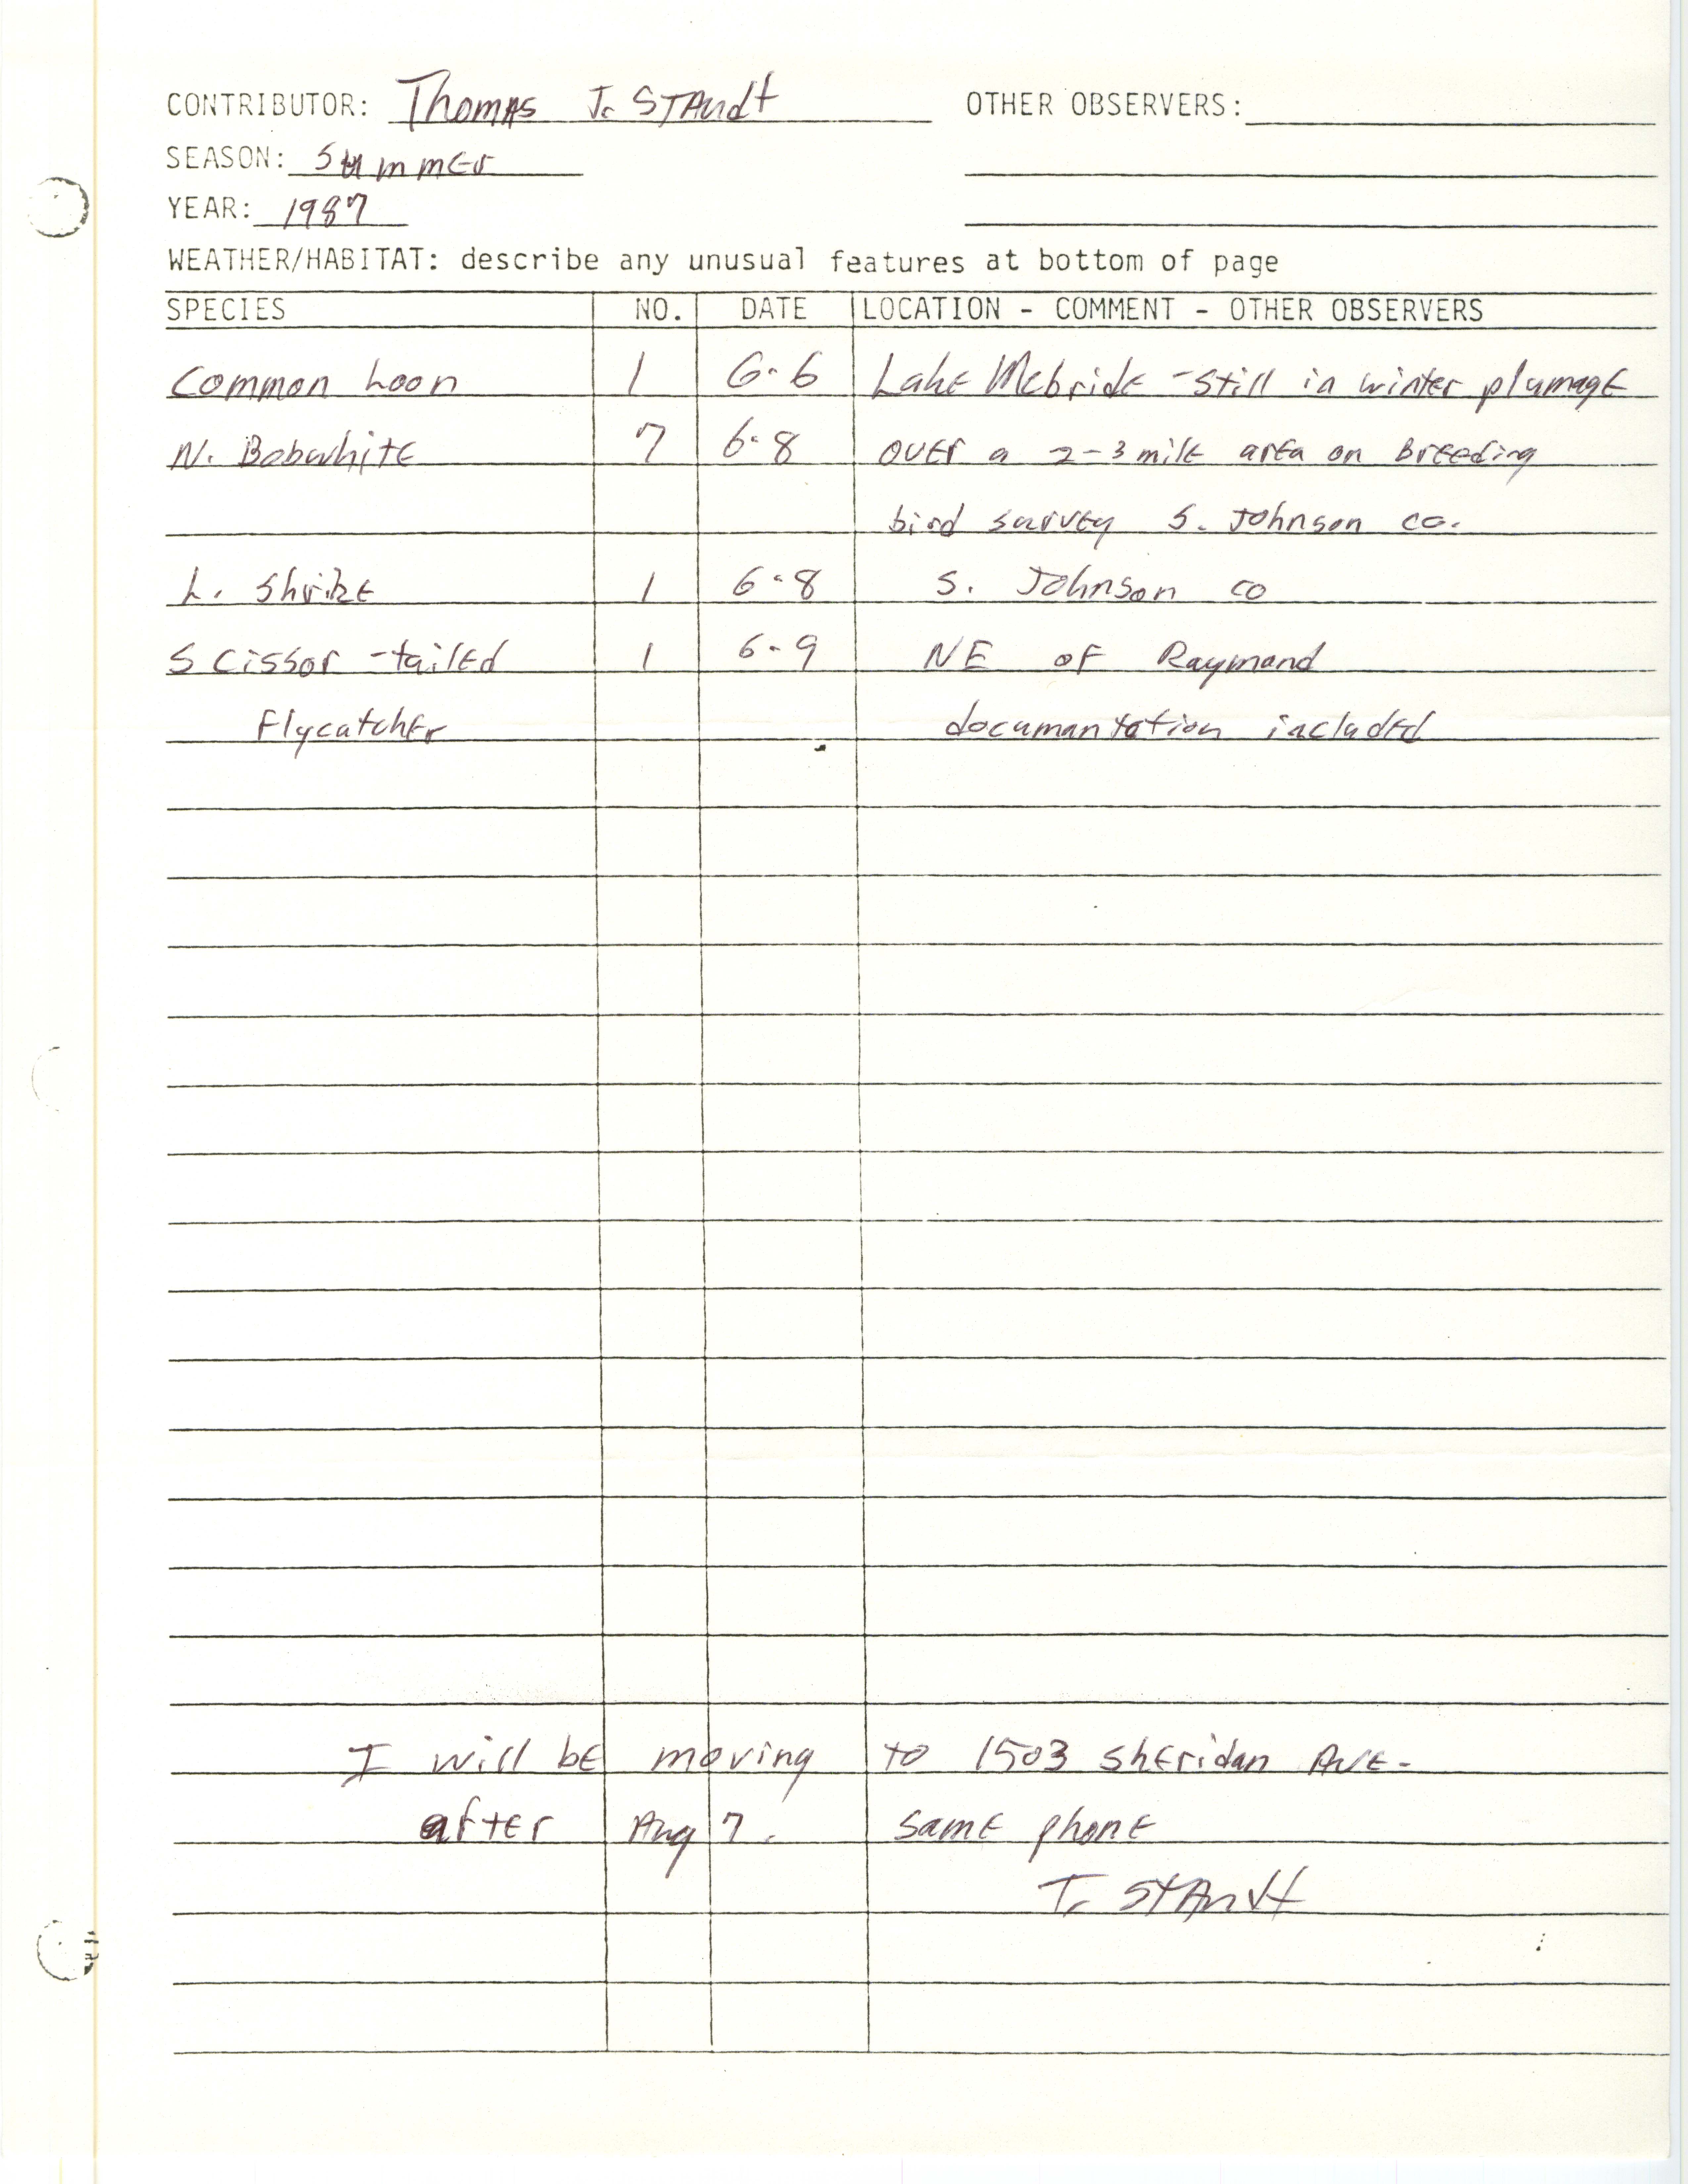 Field notes contributed by Thomas J. Staudt, summer 1987